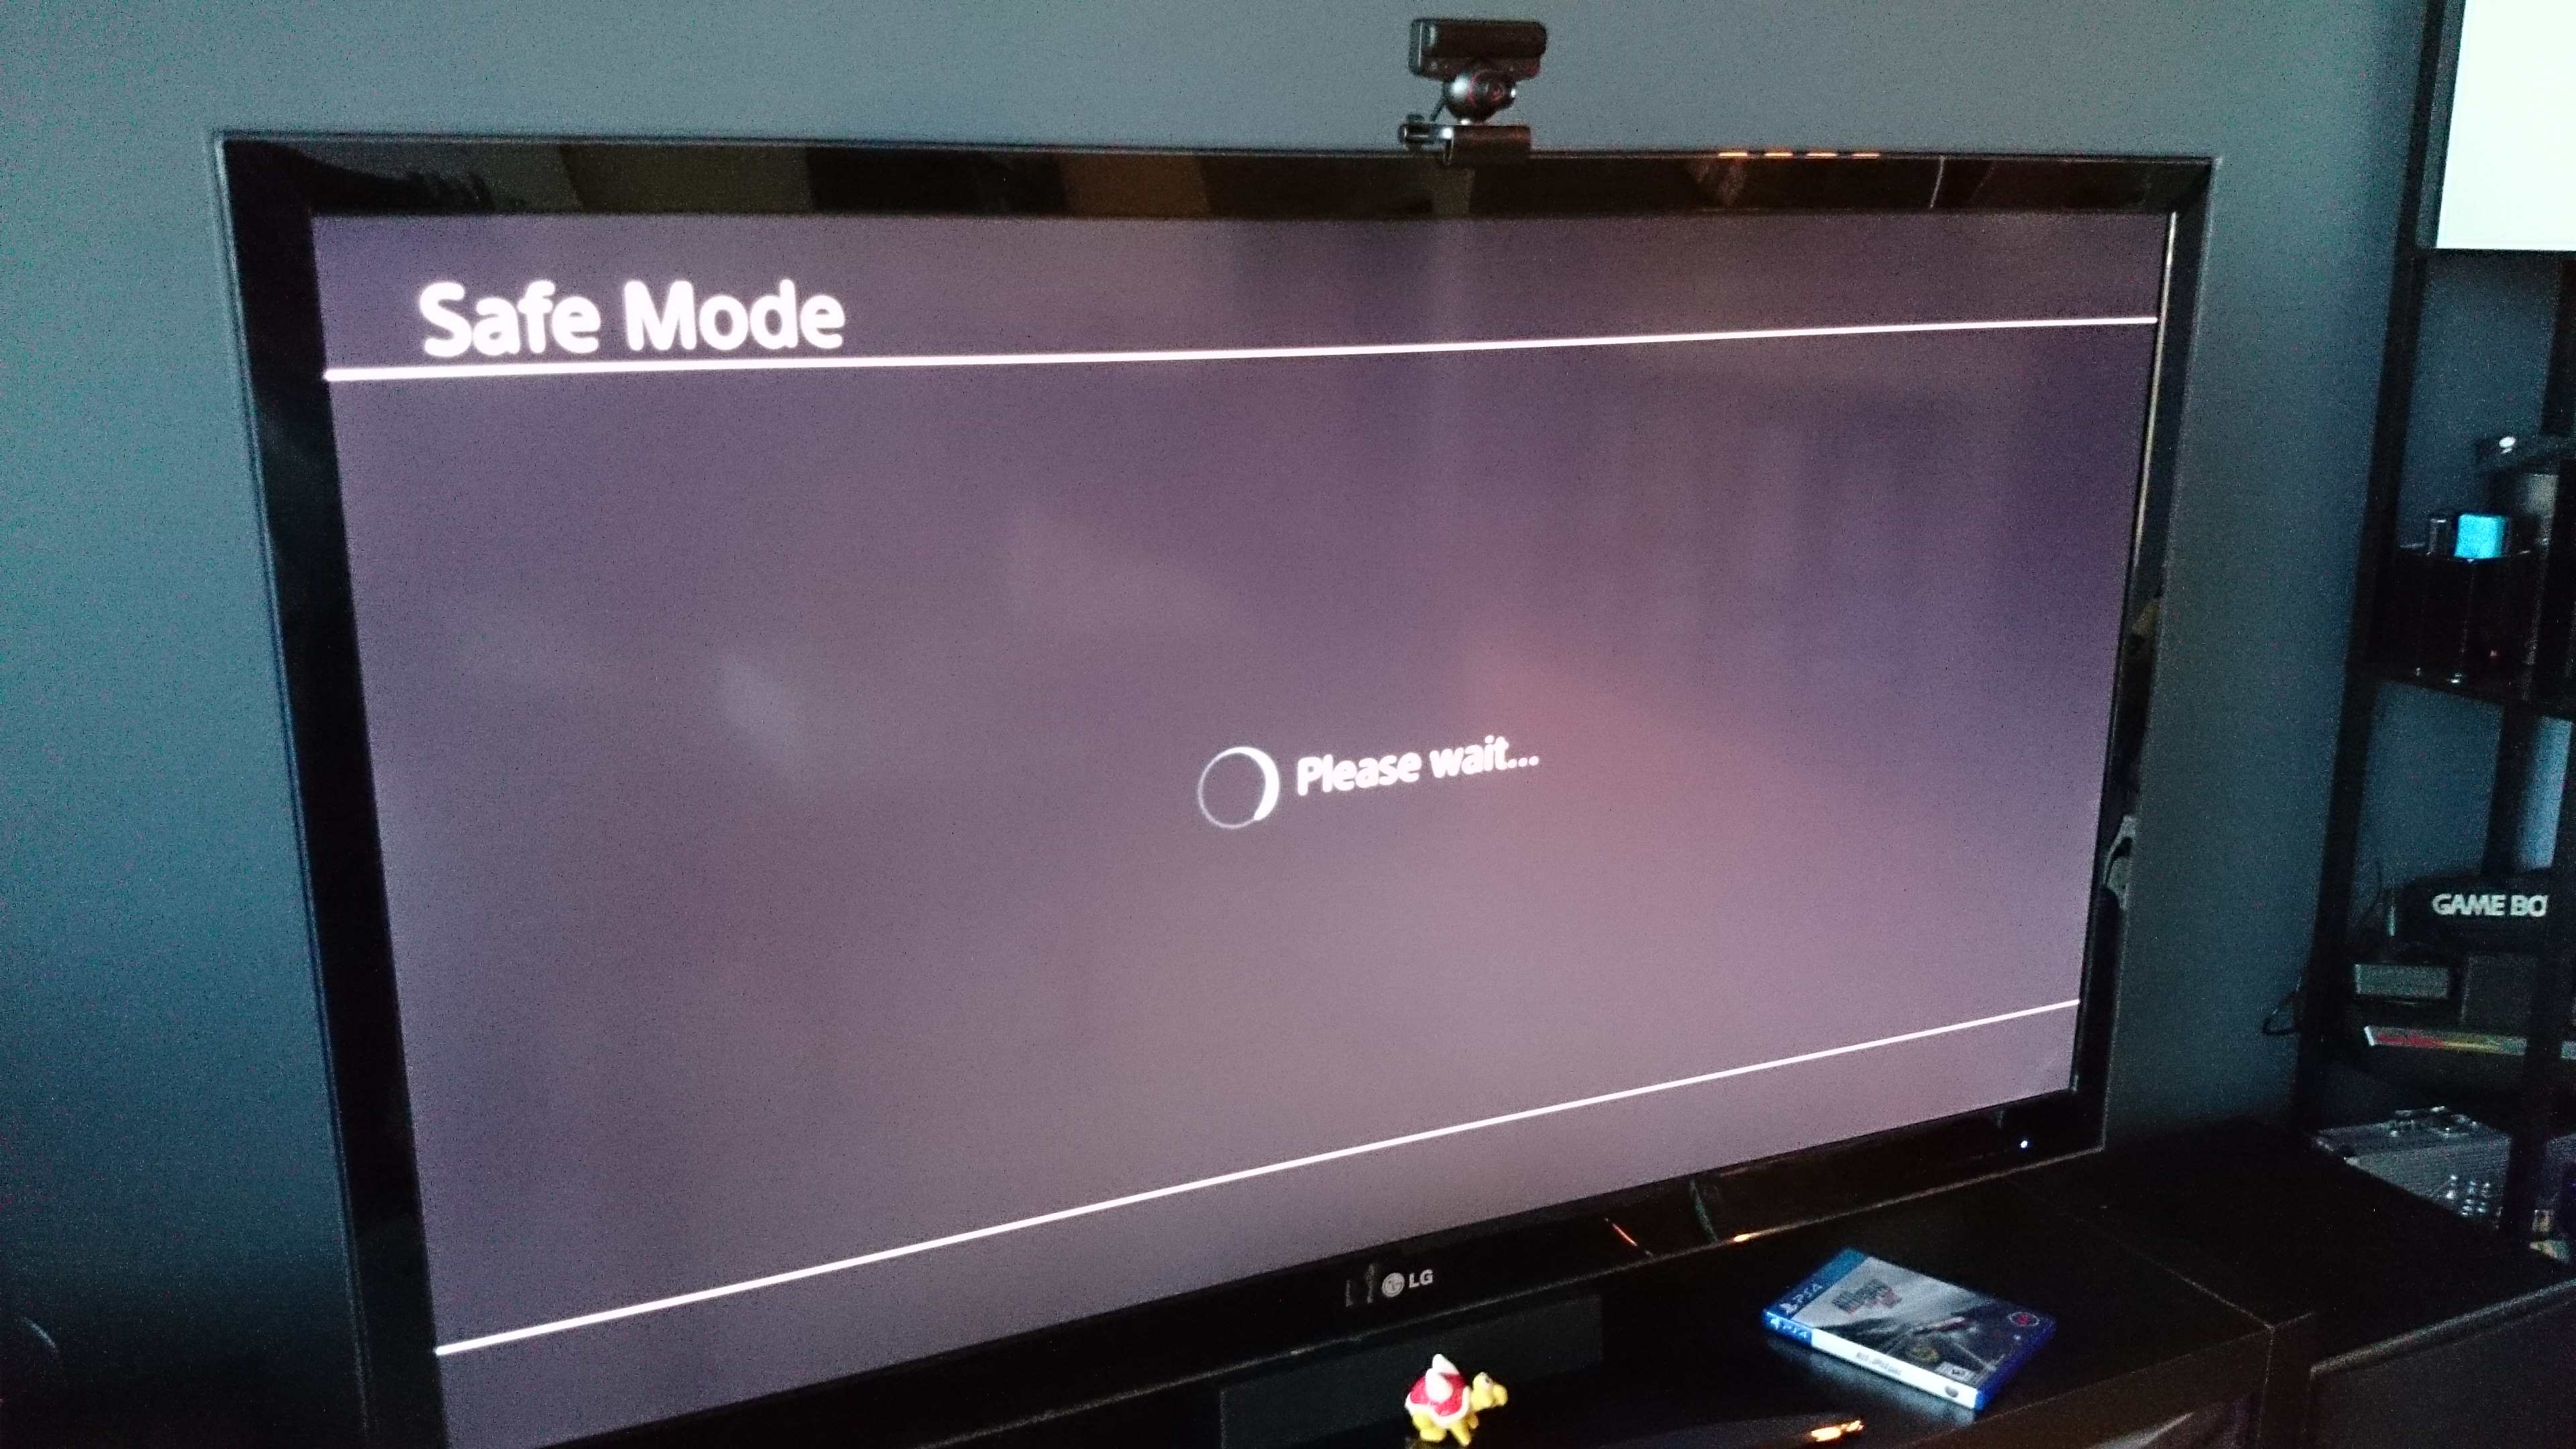 PS25: How to get into Safe Mode / Factory Reset